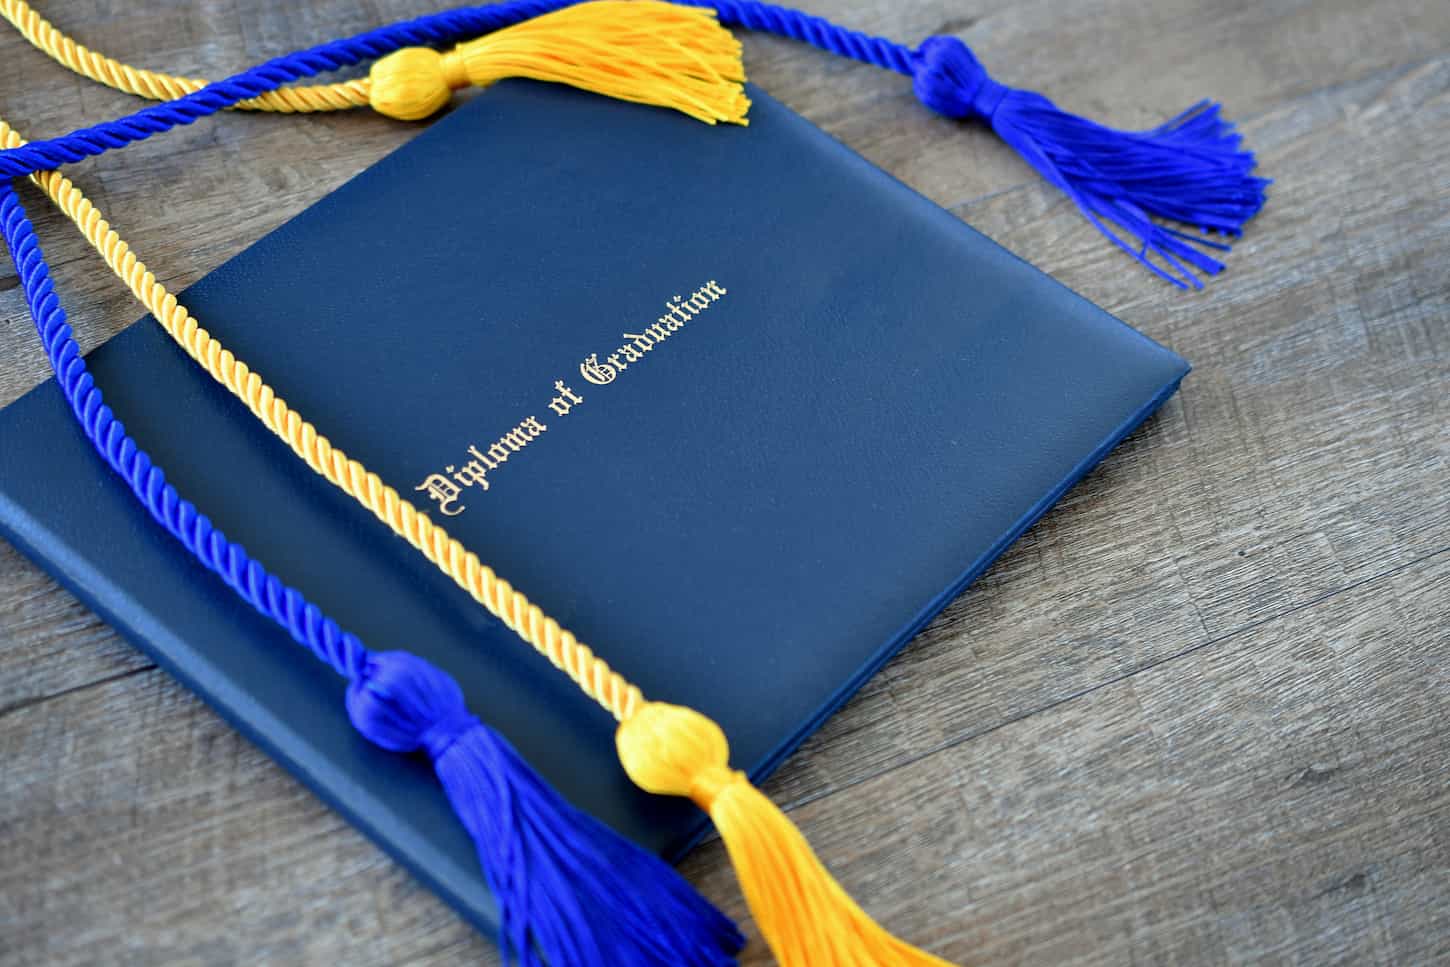 An image of a Flat lay of a Diploma of Graduation with honor cords on a simple wooden background.